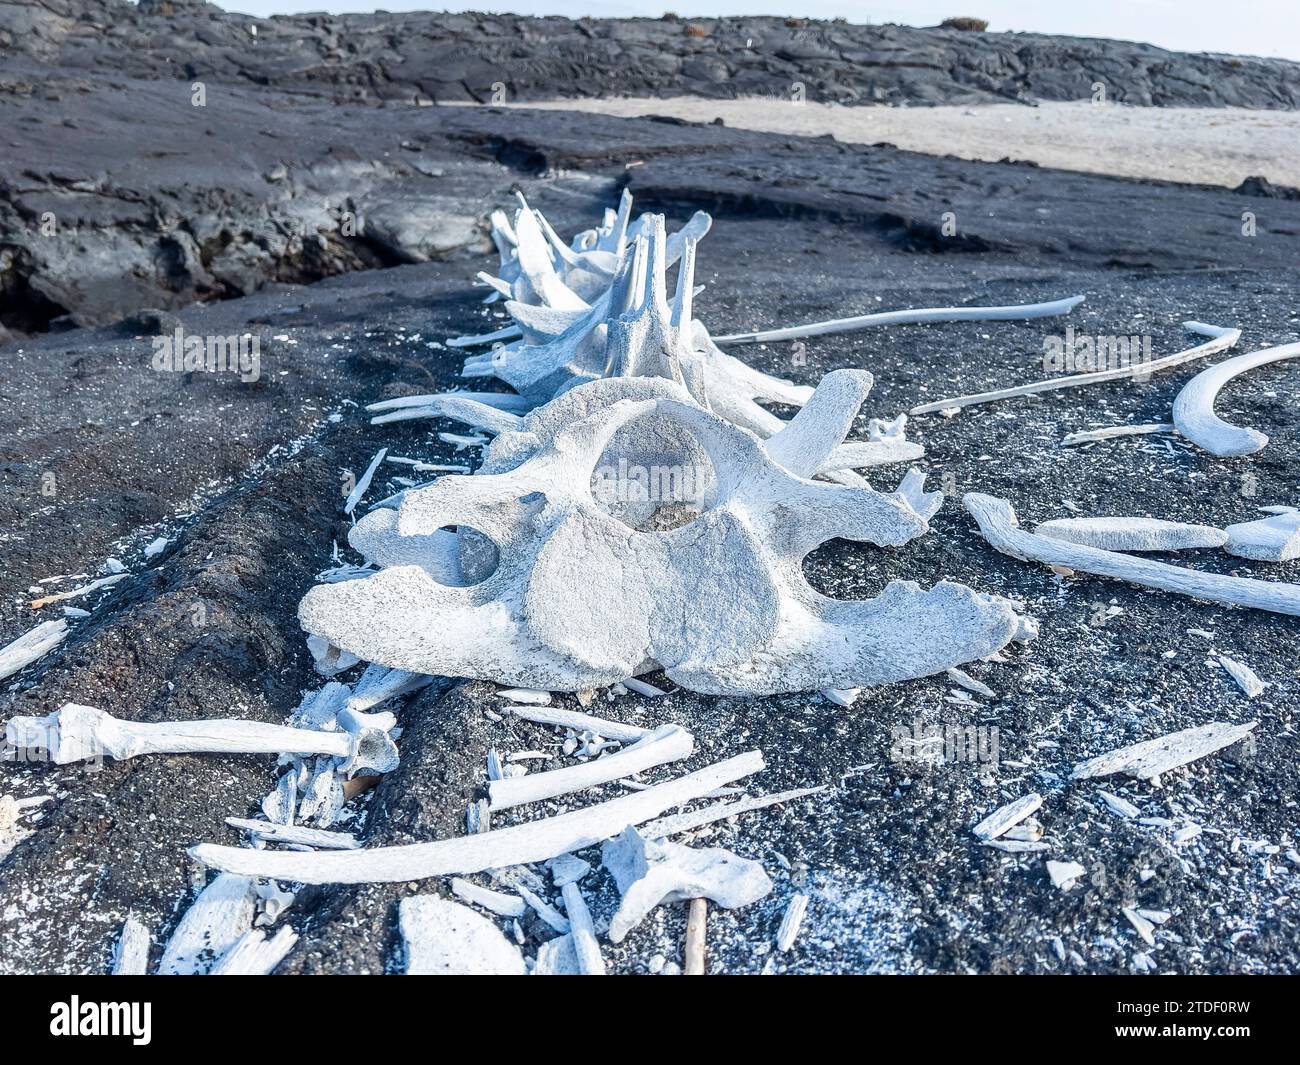 Skeleton from a Bryde's whale (Balaenoptera brydei) in the lava on Fernandina Island, Galapagos Islands, UNESCO World Heritage Site, Ecuador Stock Photo